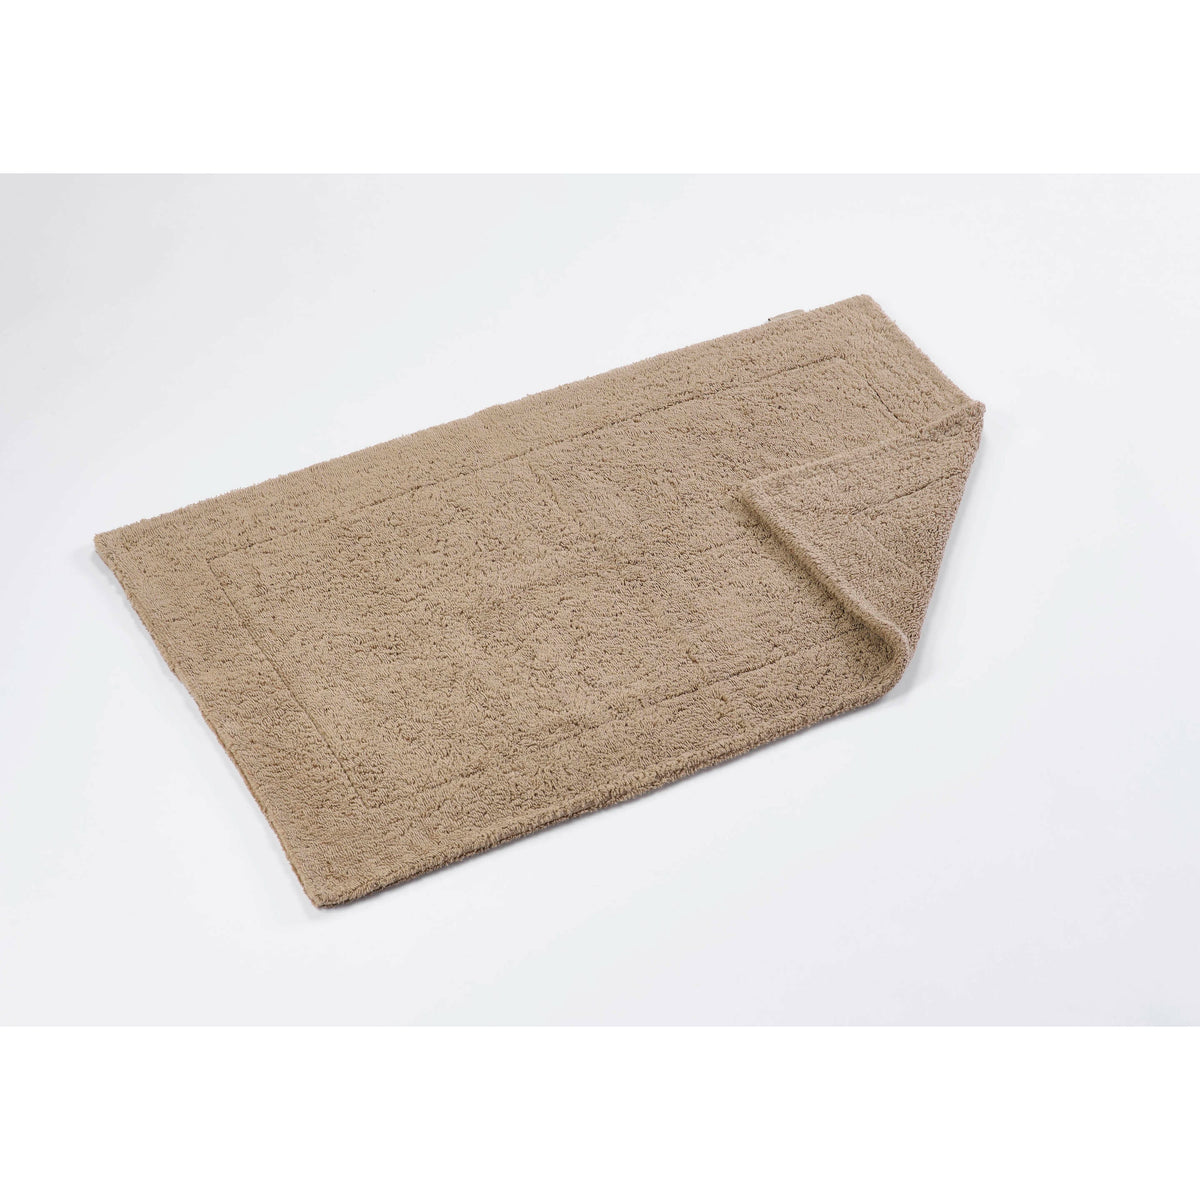 Abyss Double Super Pile Bath Tub Mat - Taupe